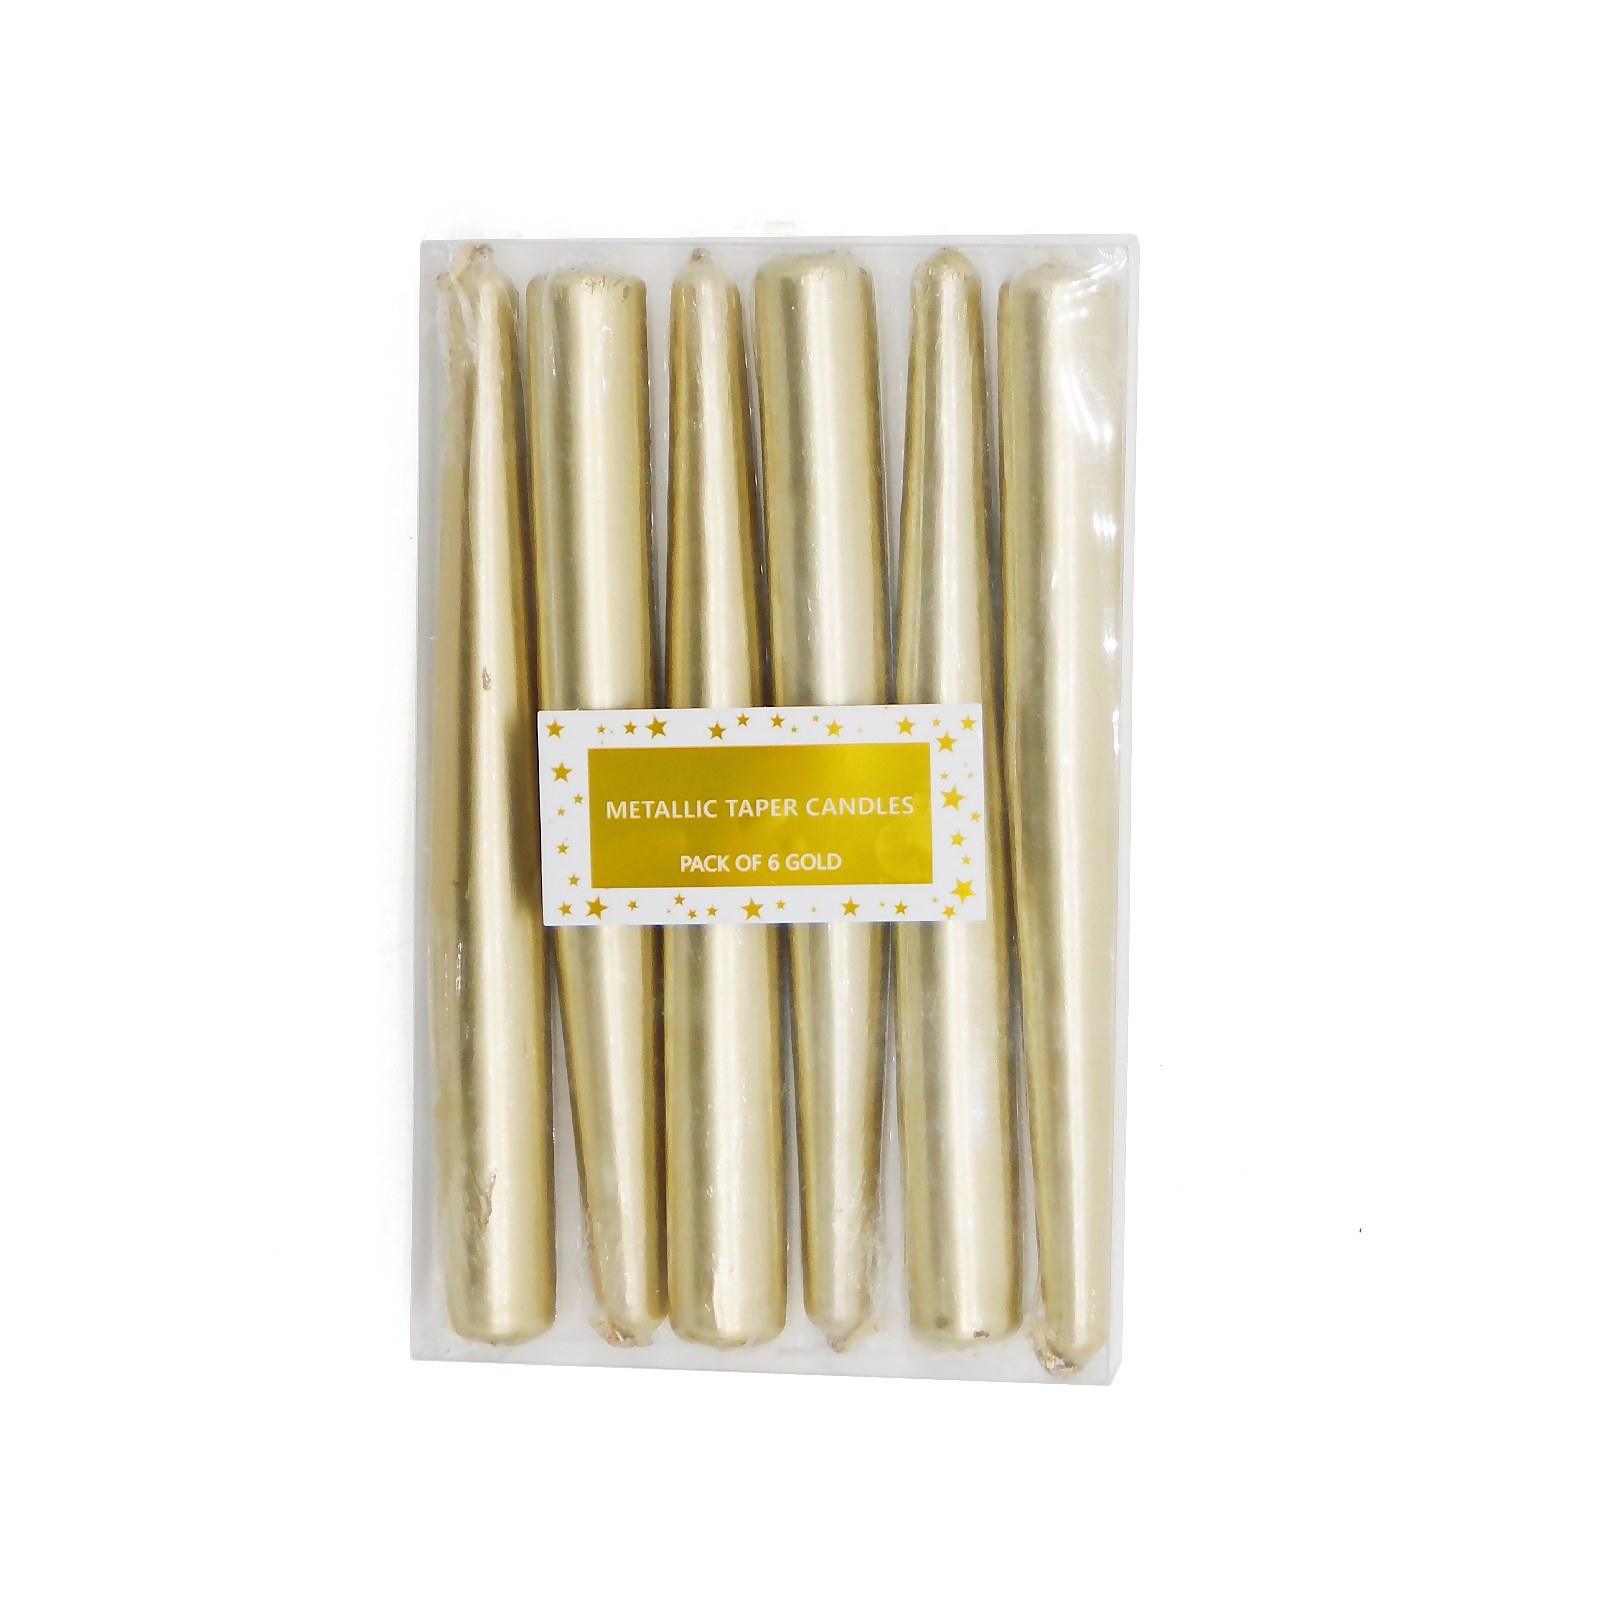 Photo of Gold Metallic Taper Candles - 6 Pack